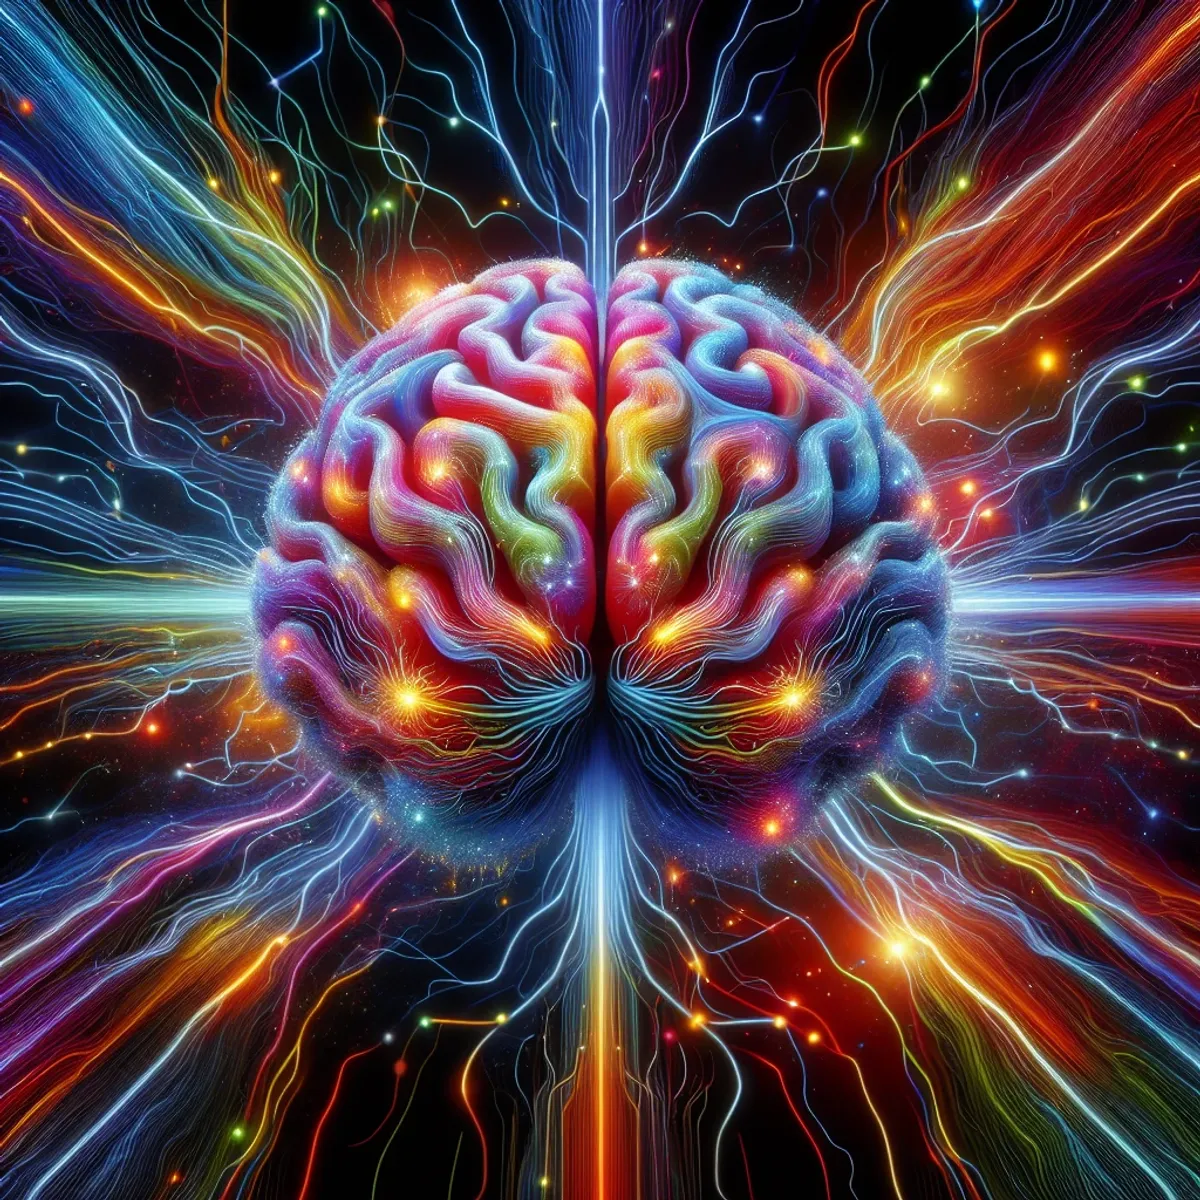 Vibrant and colorful brain filled with intricate networks of neurons radiating a spectrum of hues.